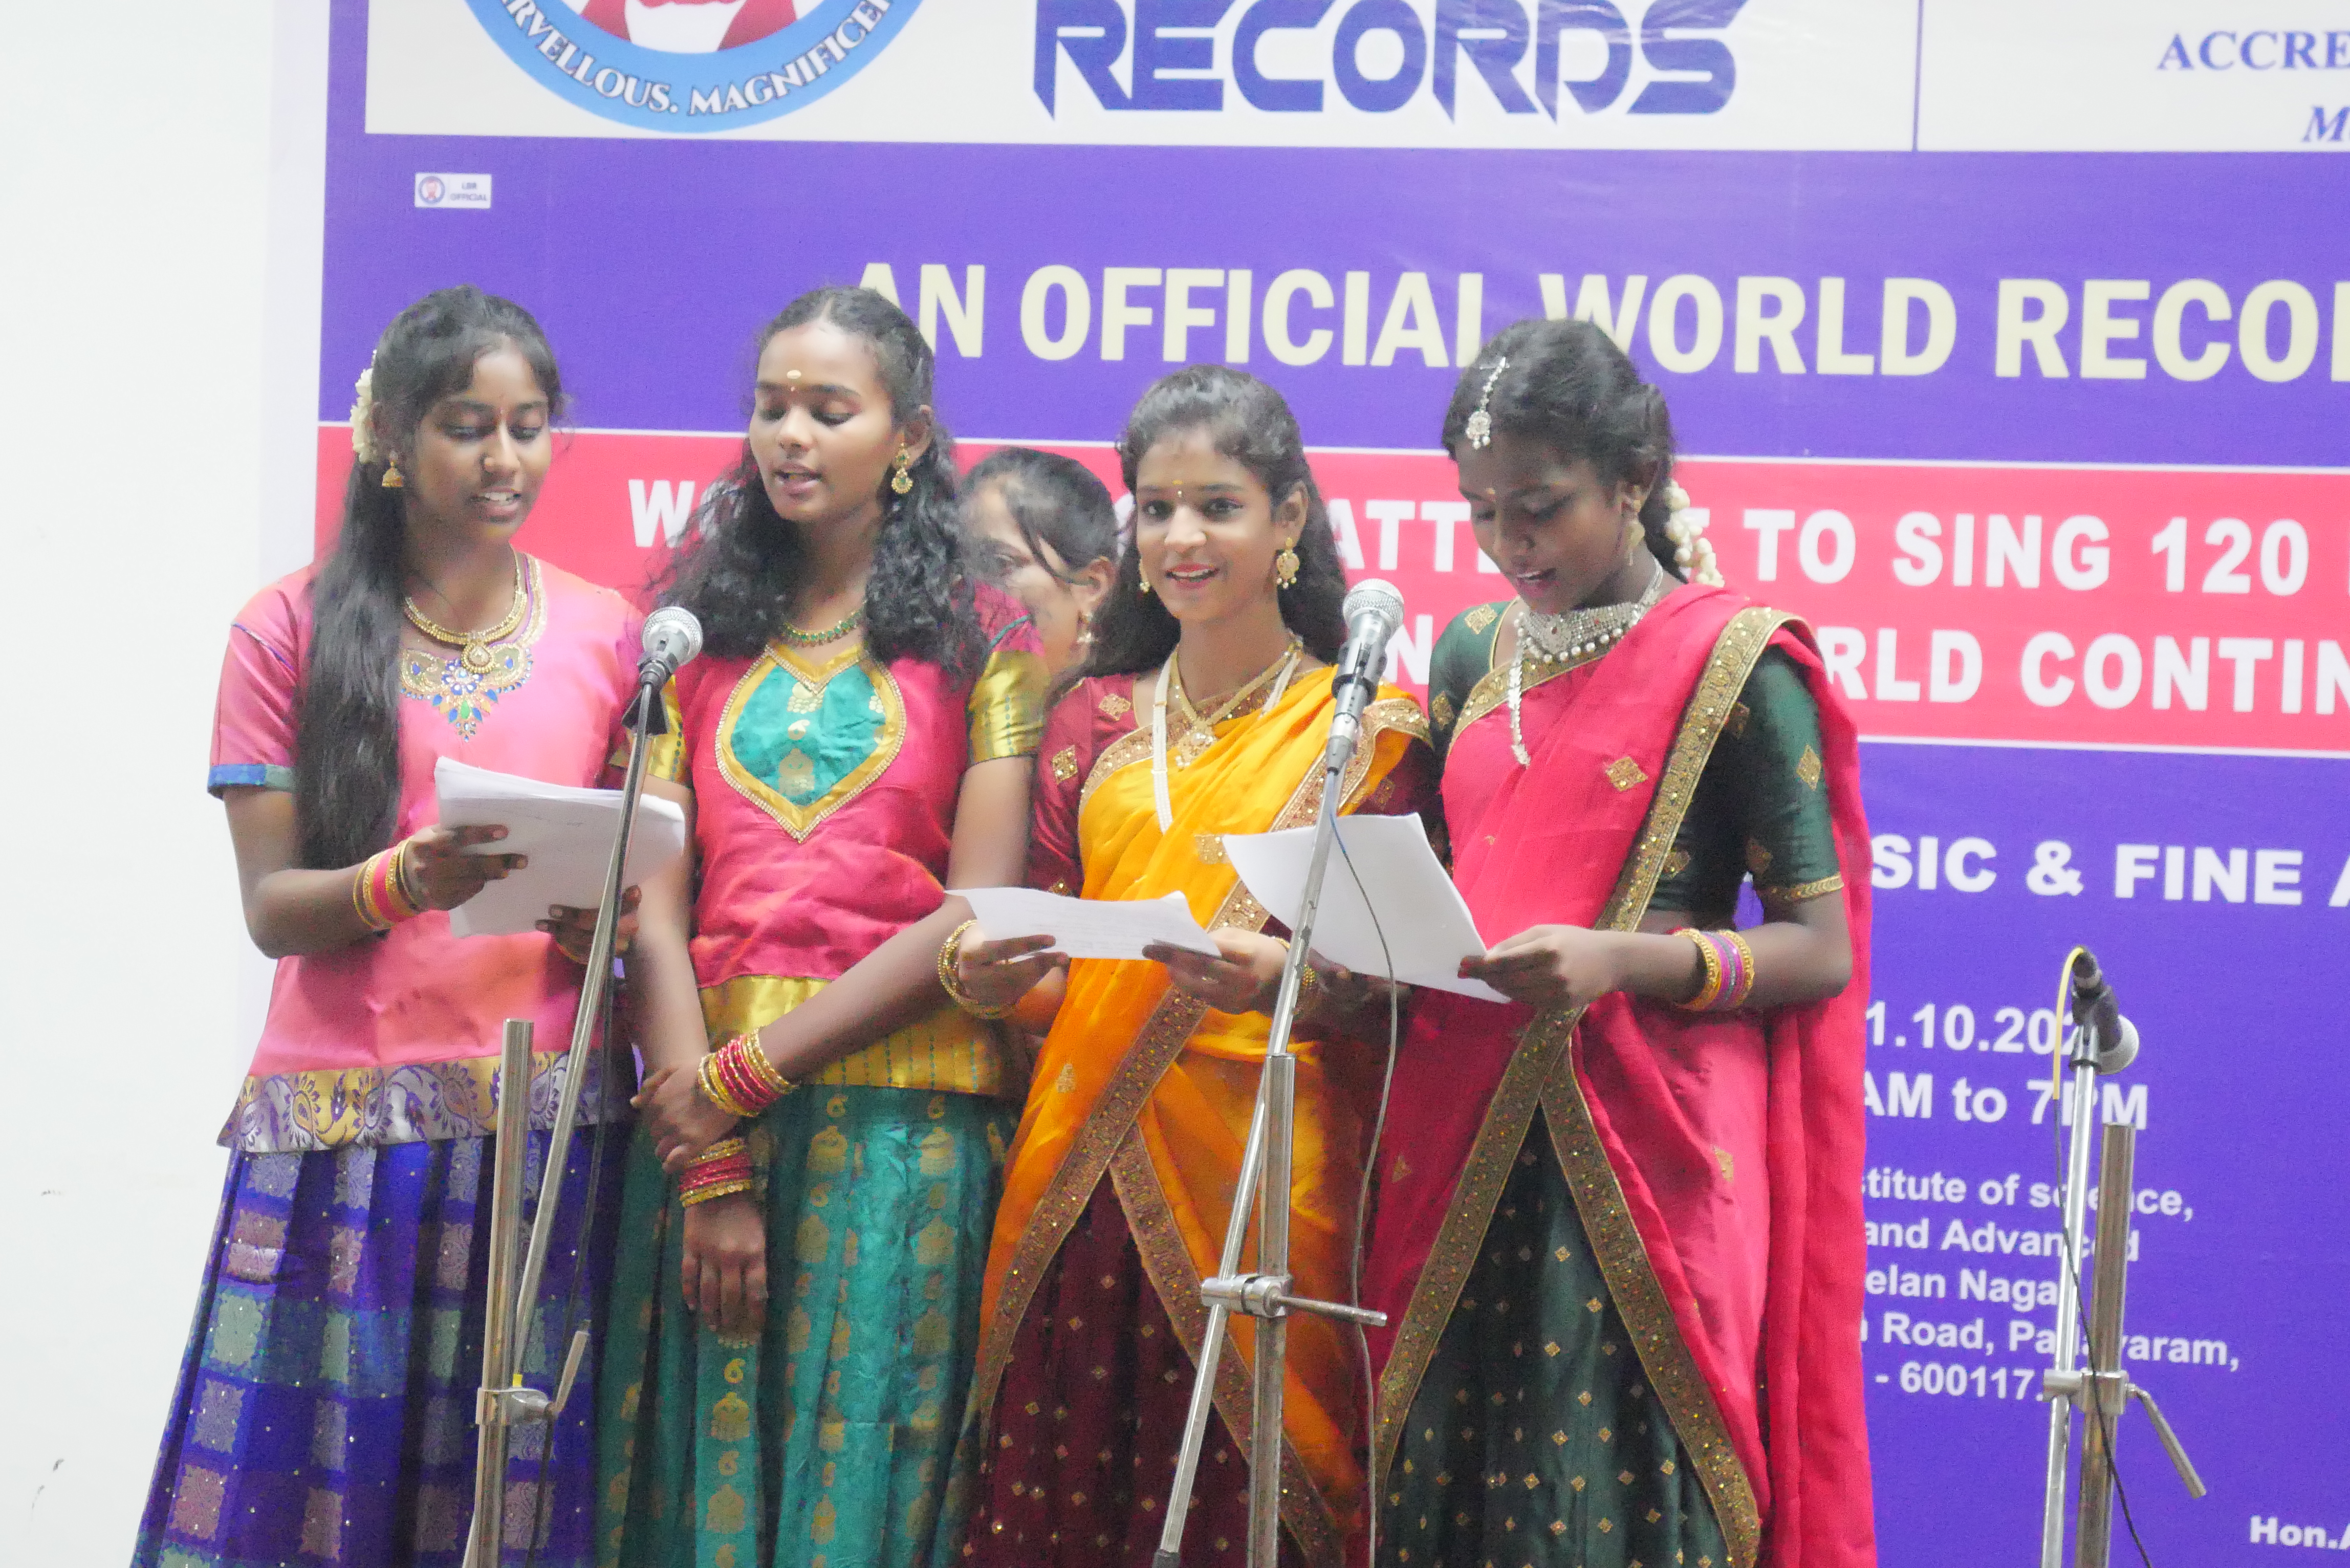 WORLD RECORD ATTEMPT TO SING 120 DEVOTIONAL SONGS  FOR THE FIRST TIME IN THE WORLD CONTINUOUSLY FOR 10 HOURS